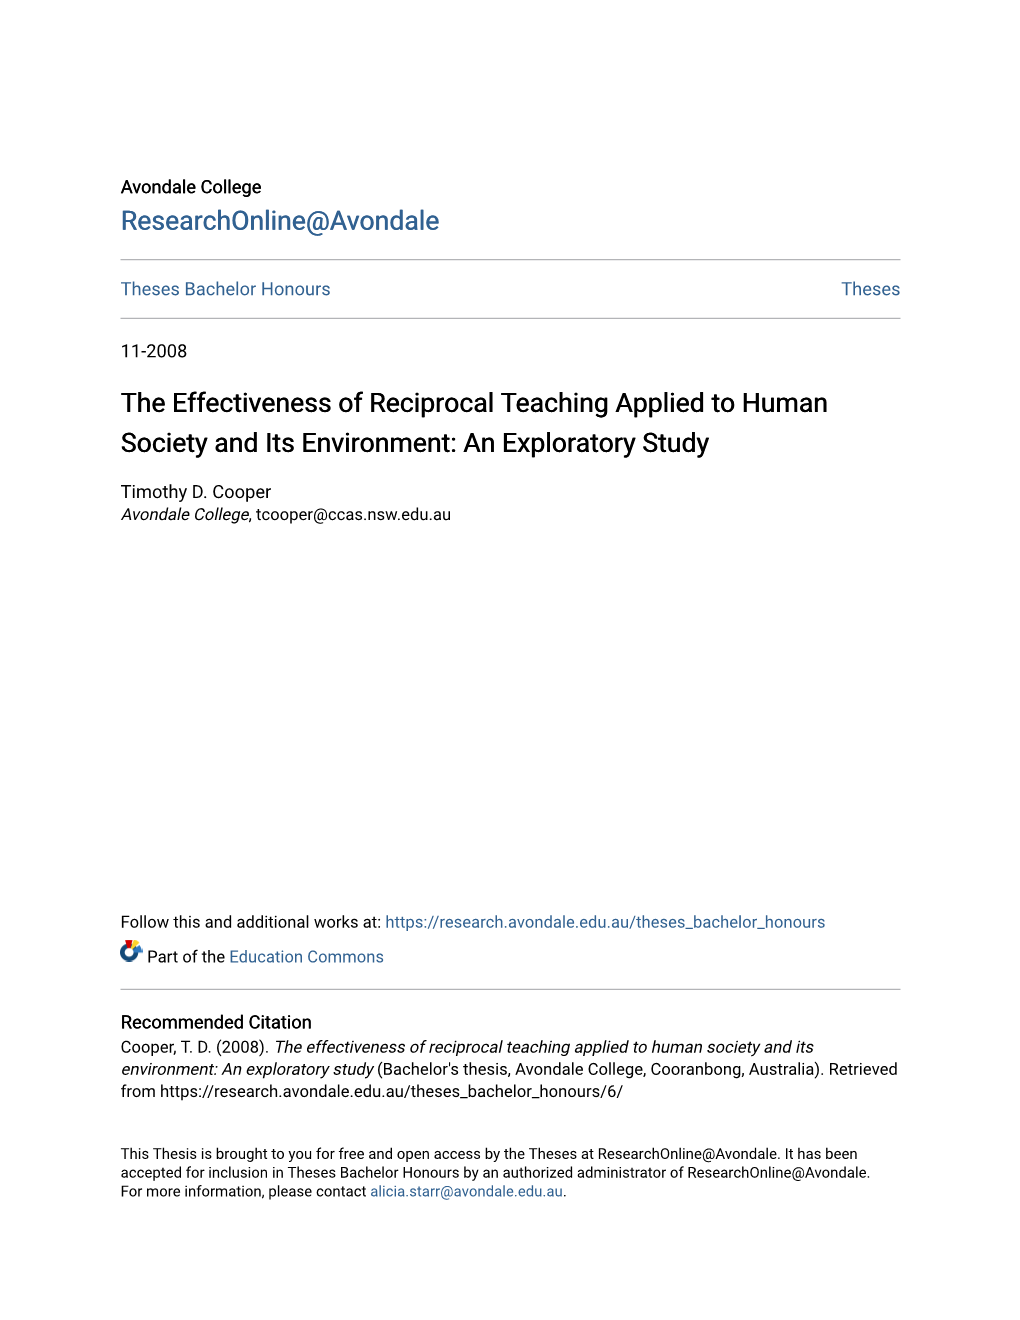 The Effectiveness of Reciprocal Teaching Applied to Human Society and Its Environment: an Exploratory Study